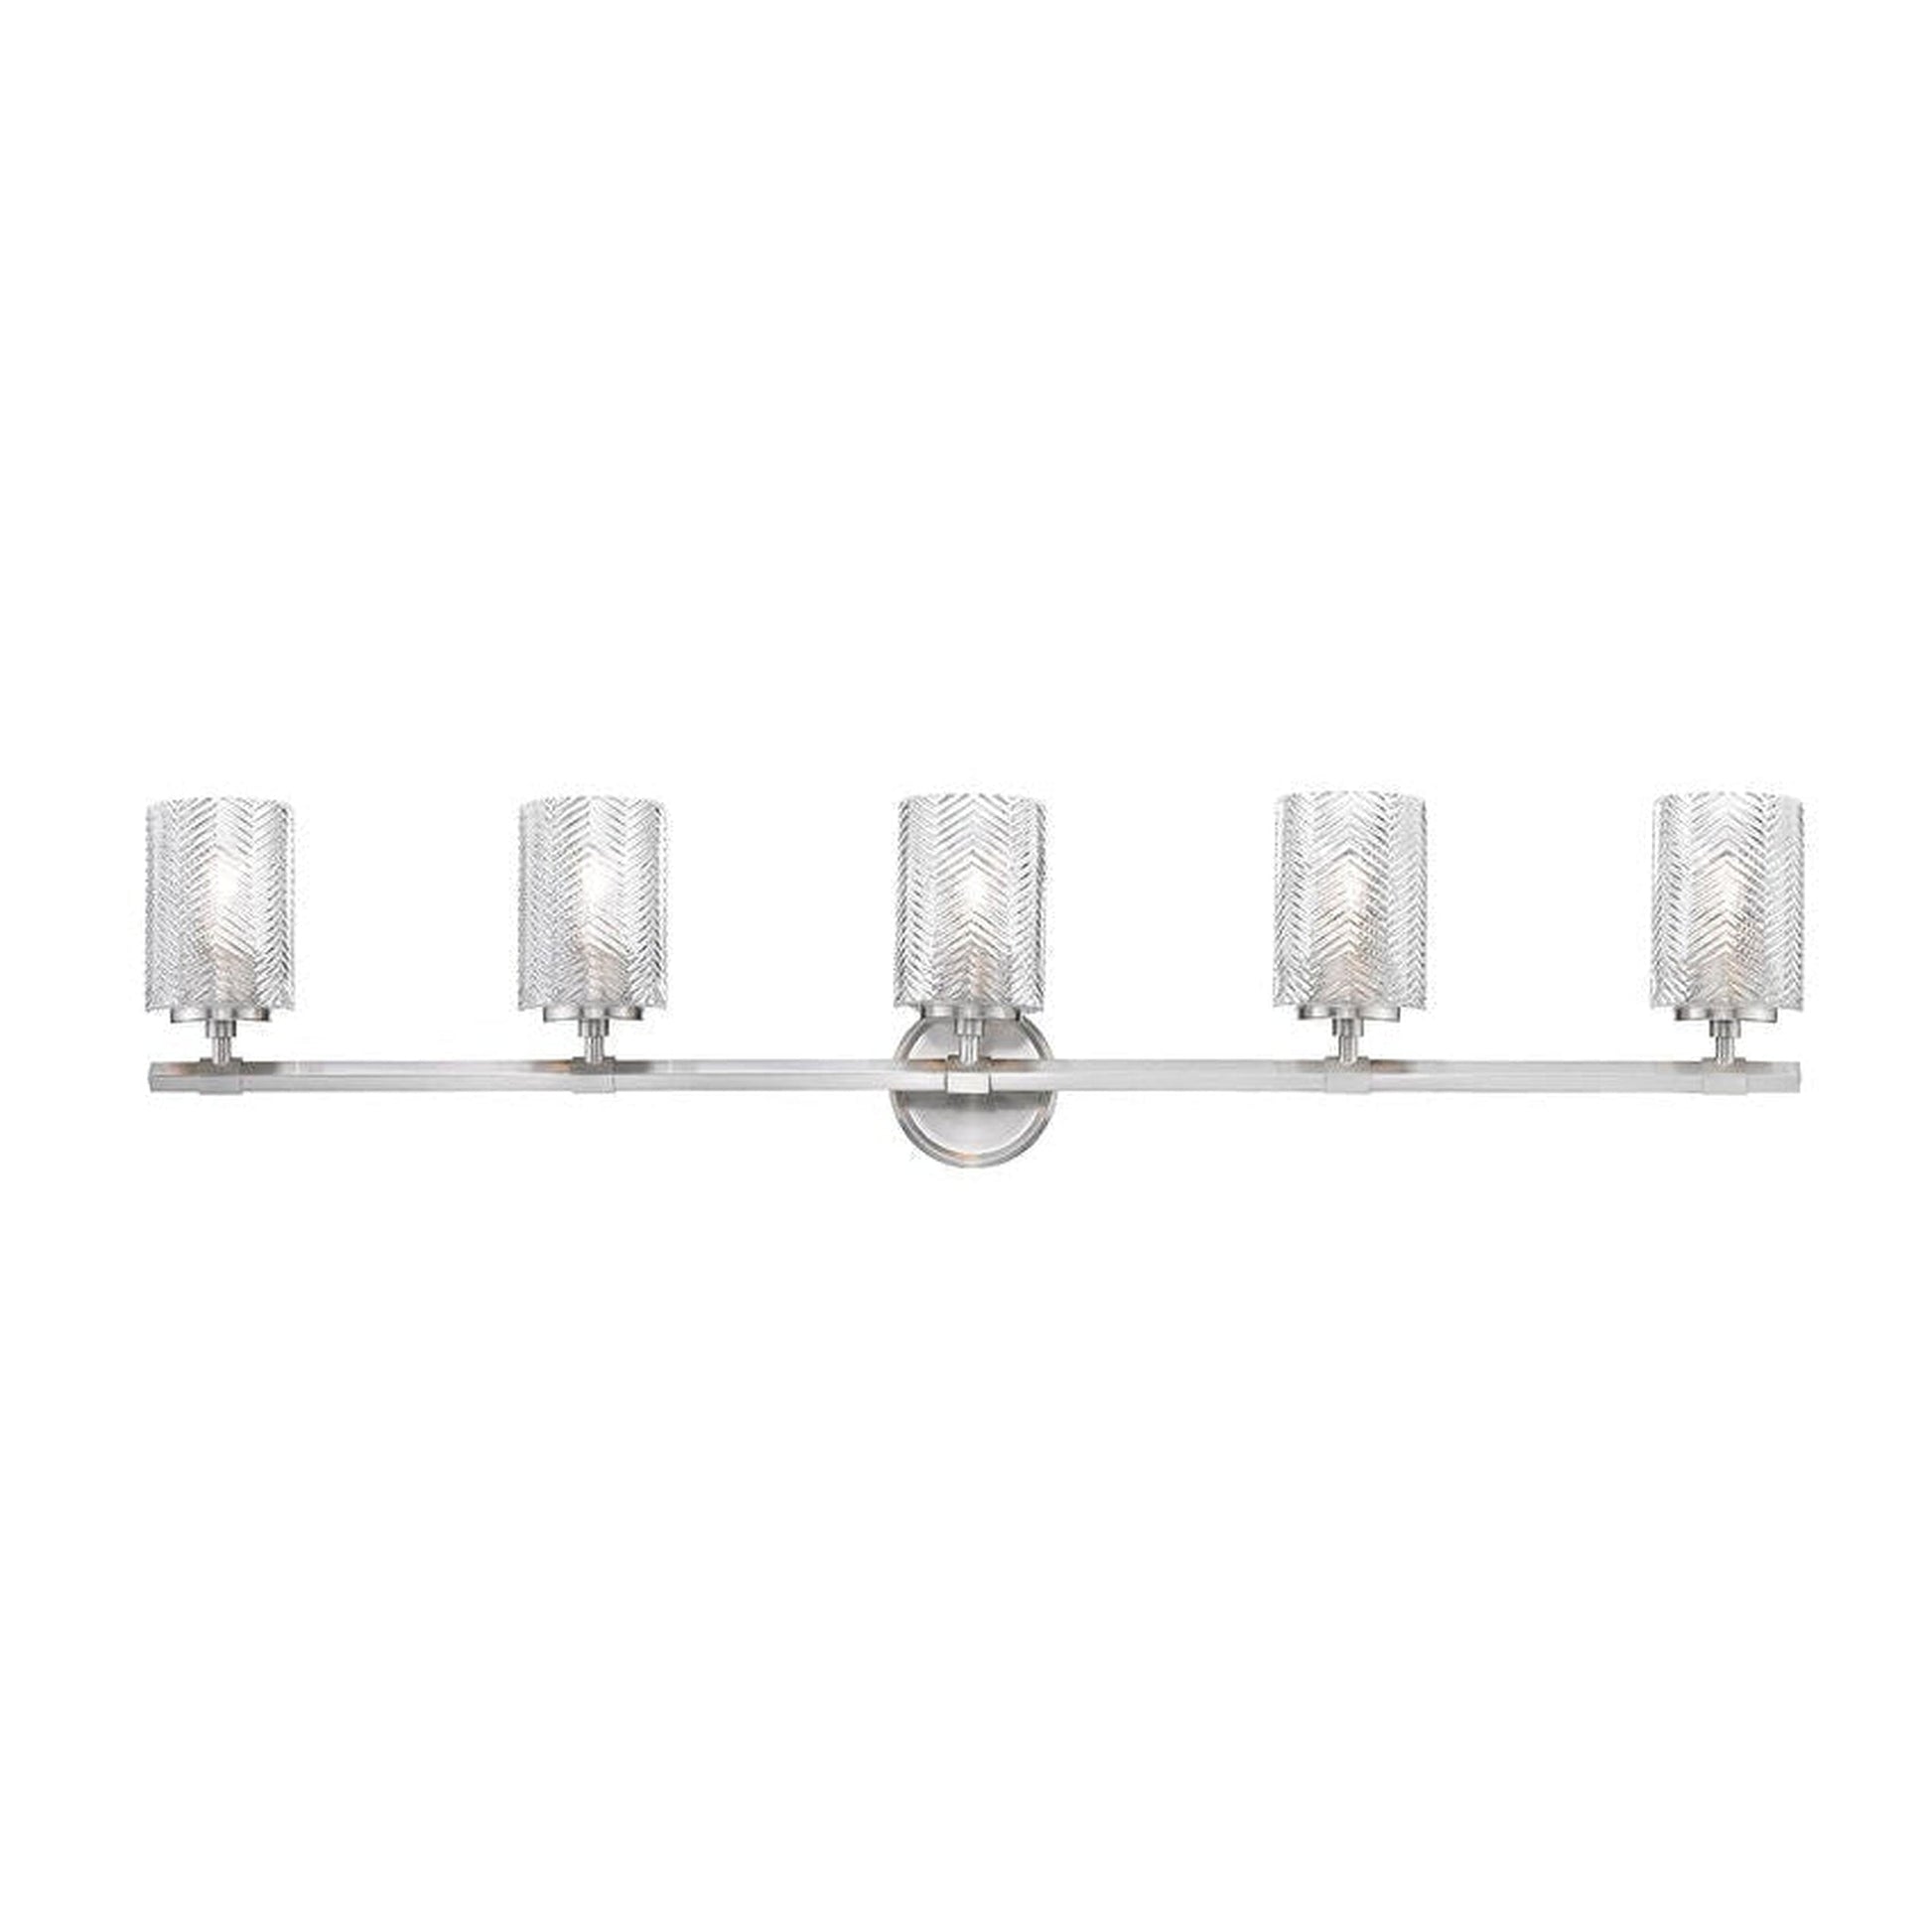 Z-Lite Dover Street 42" 5-Light Brushed Nickel Vanity Light With Clear Glass Shade